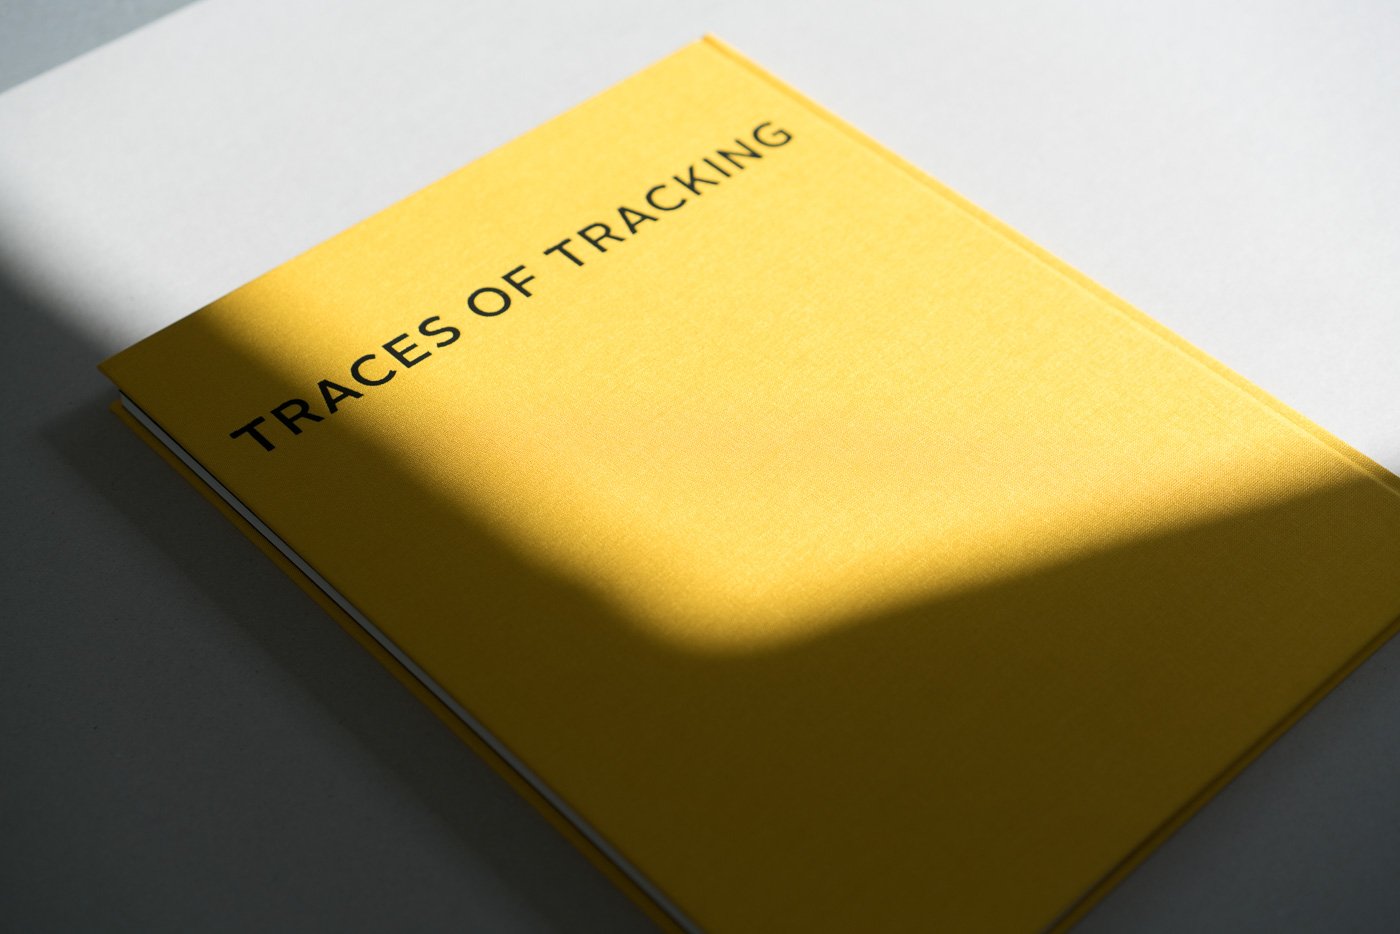 Christian André Strand - Traces of tracking